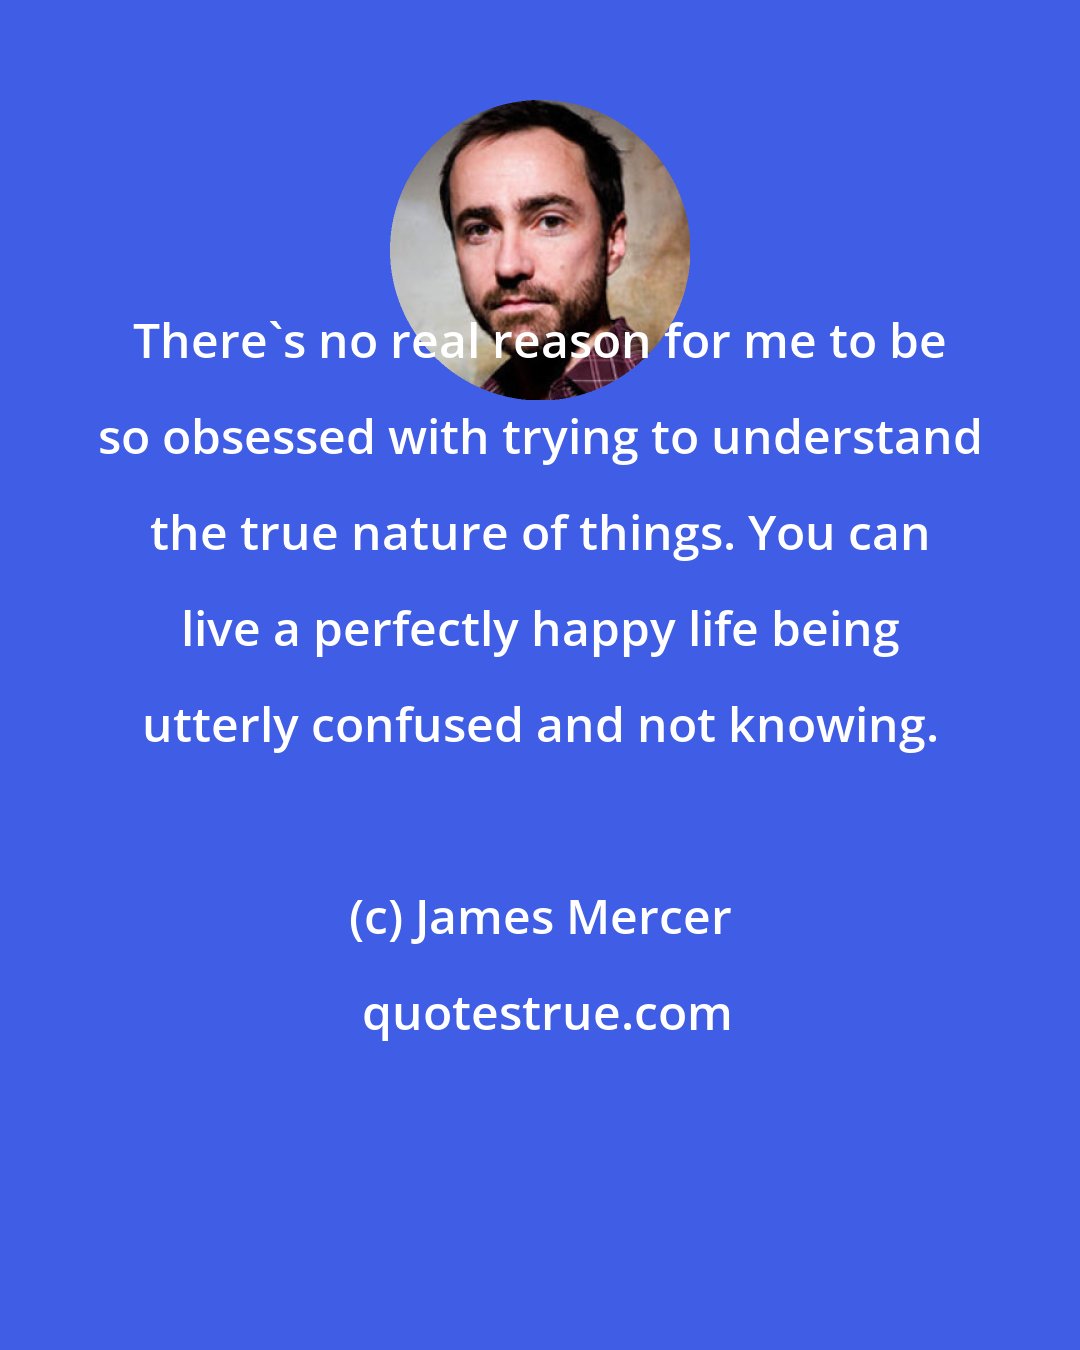 James Mercer: There's no real reason for me to be so obsessed with trying to understand the true nature of things. You can live a perfectly happy life being utterly confused and not knowing.